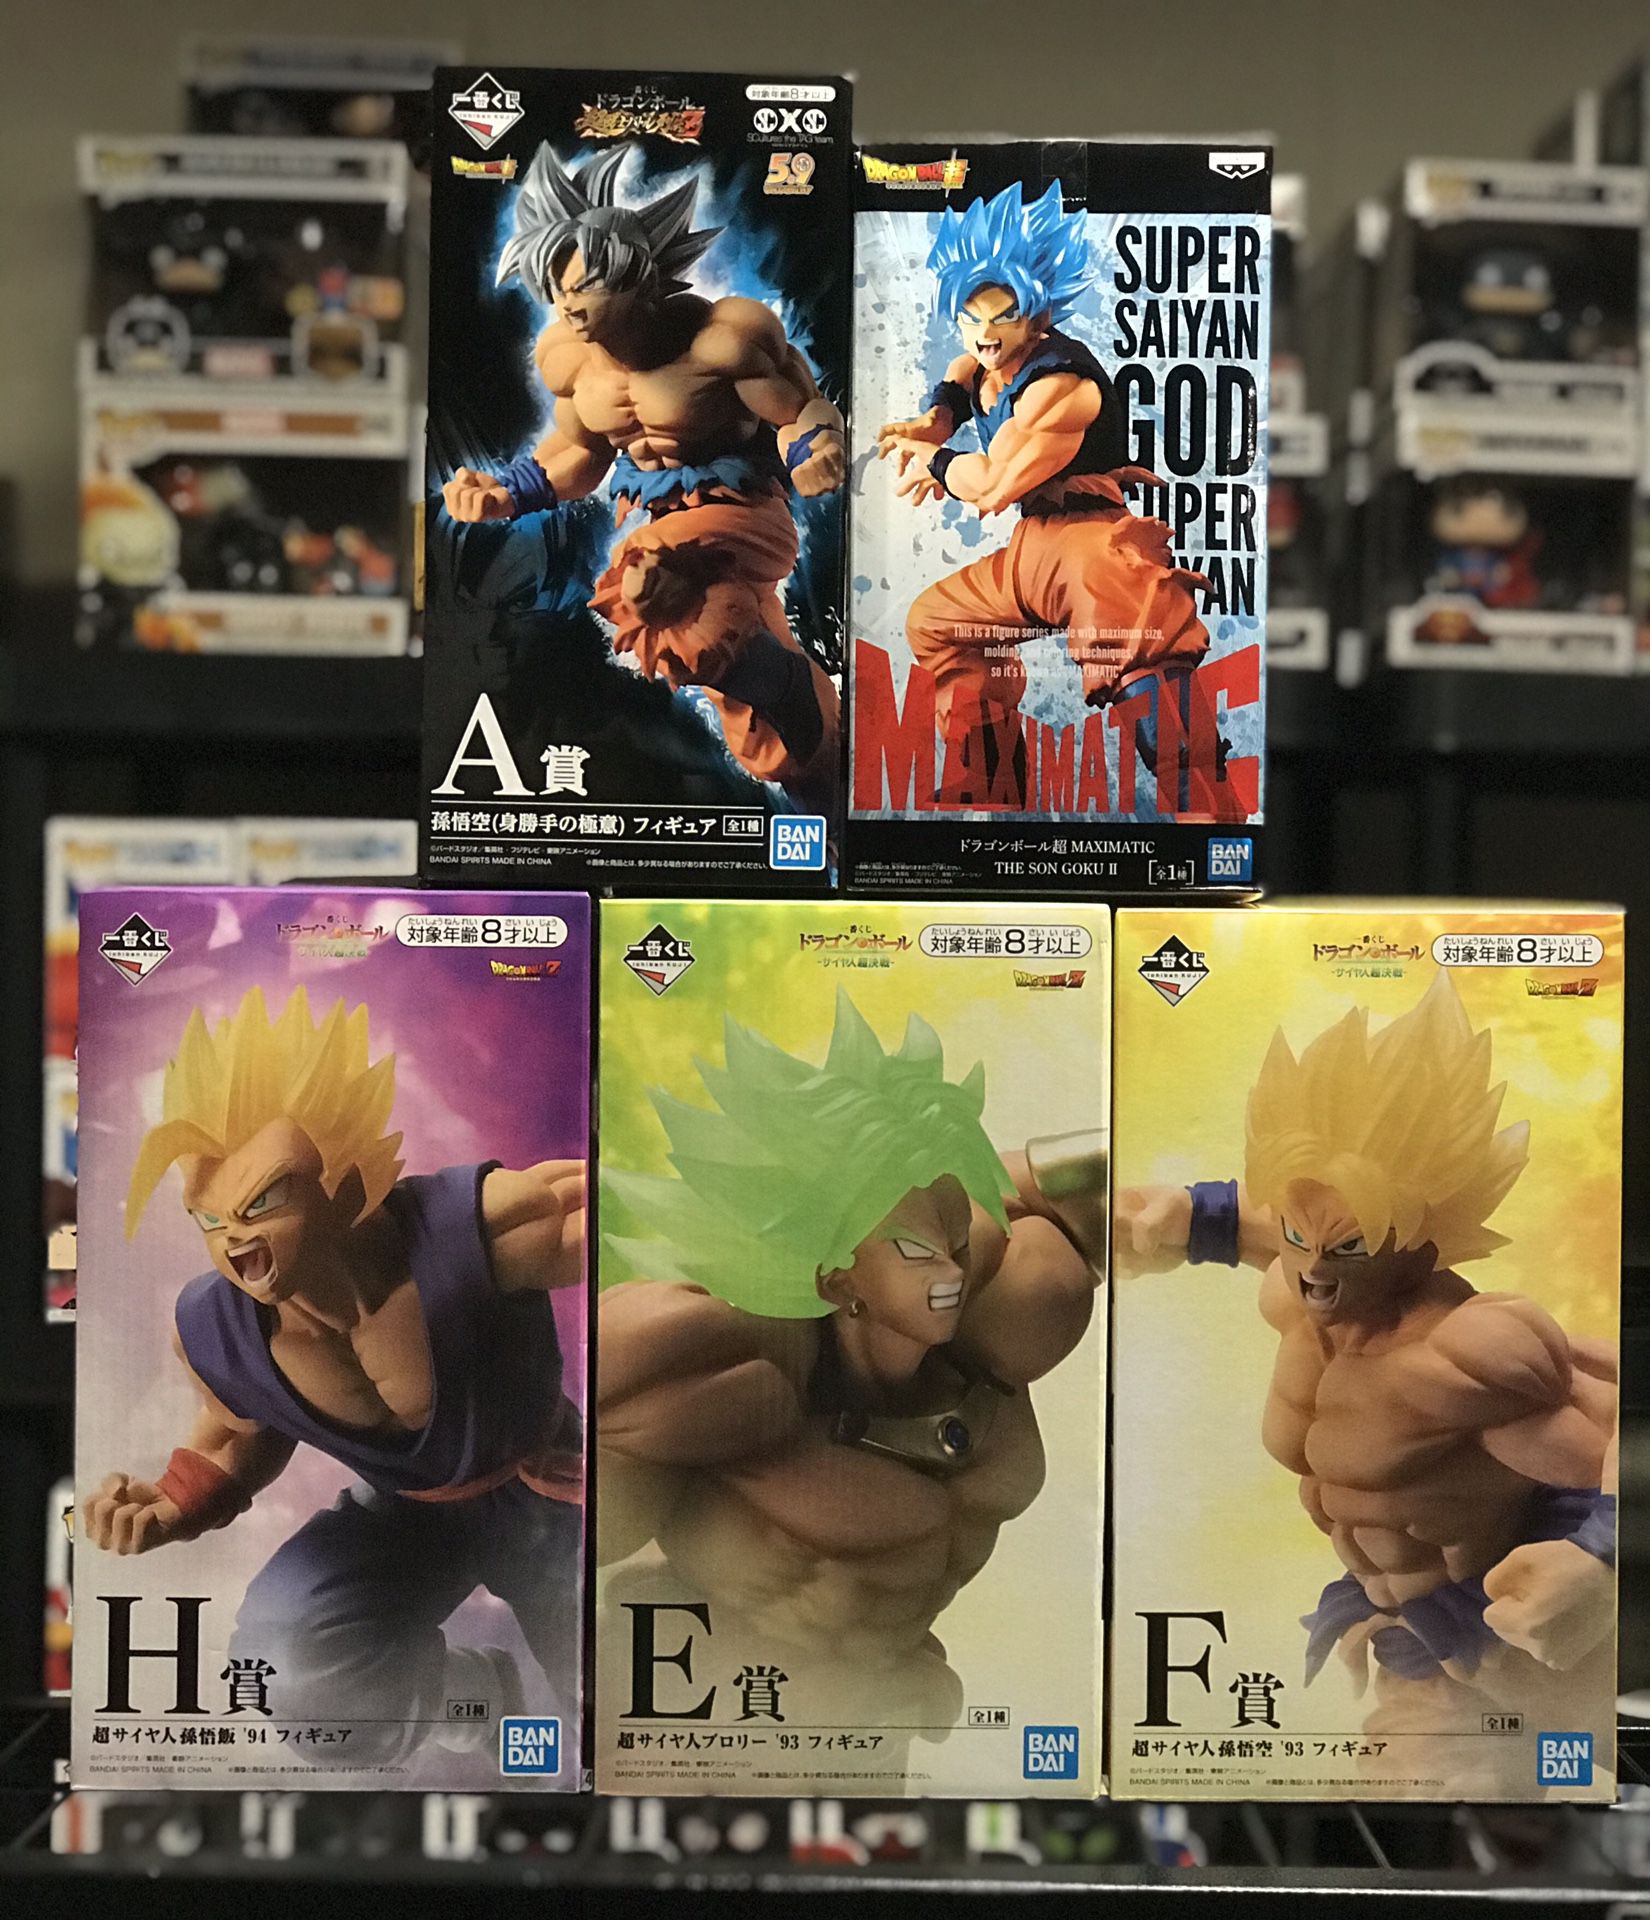 Dragonball Z and My Hero Statue Figures